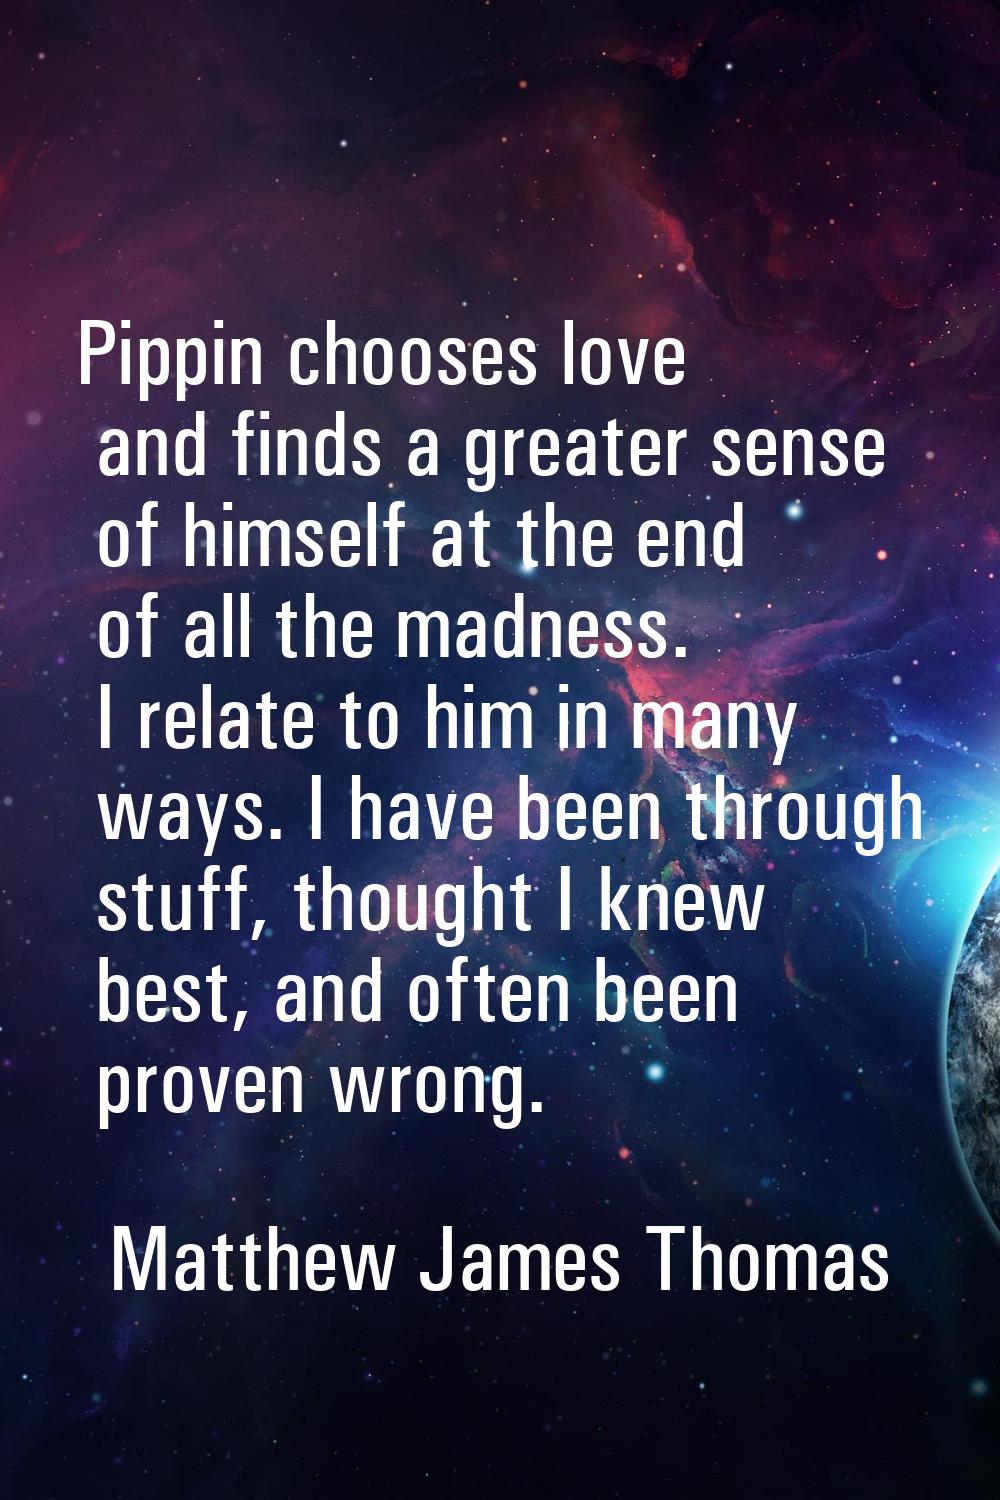 Pippin chooses love and finds a greater sense of himself at the end of all the madness. I relate to